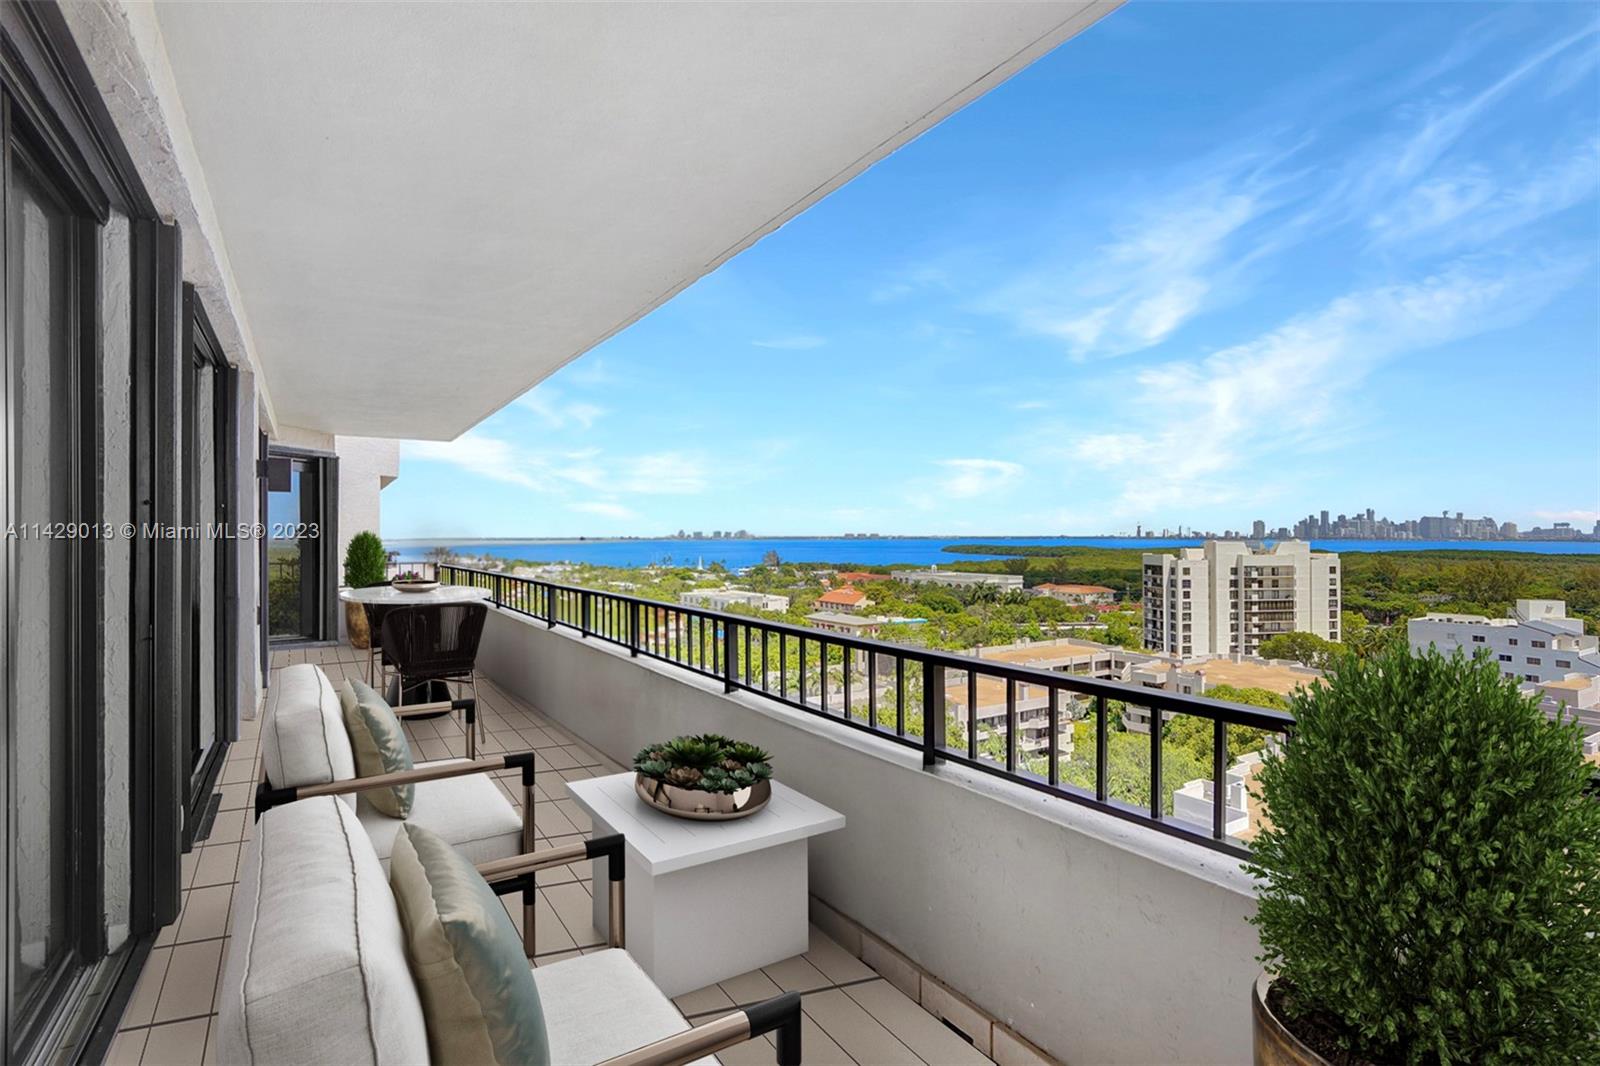 Welcome to a one-of-a-kind, rarely available Penthouse 1222 at prestigious Key Colony in Key Biscayne! Enjoy spectacular sunsets from your oversized terrace w extraordinary, unobstructed, 180 degree infinite views overlooking the iconic Miami skyline. Perfect for a large family w a flexible floor plan of over 3,120 sq/ft., this unique 4/3 property feels like a house & is ideal for entertainment. Move right-in or modify & update to make it your own. Two of the rooms can easily be reconverted back to bedrooms. Every room has water views & access to the massive terrace. Plus, 3 prime parking spaces. Emerald Bay is a full service luxury building that also offers a popular Tennis Center w 12 lighted courts. Enjoy the Key Biscayne lifestyle from this unique oceanfront Penthouse in the sky!